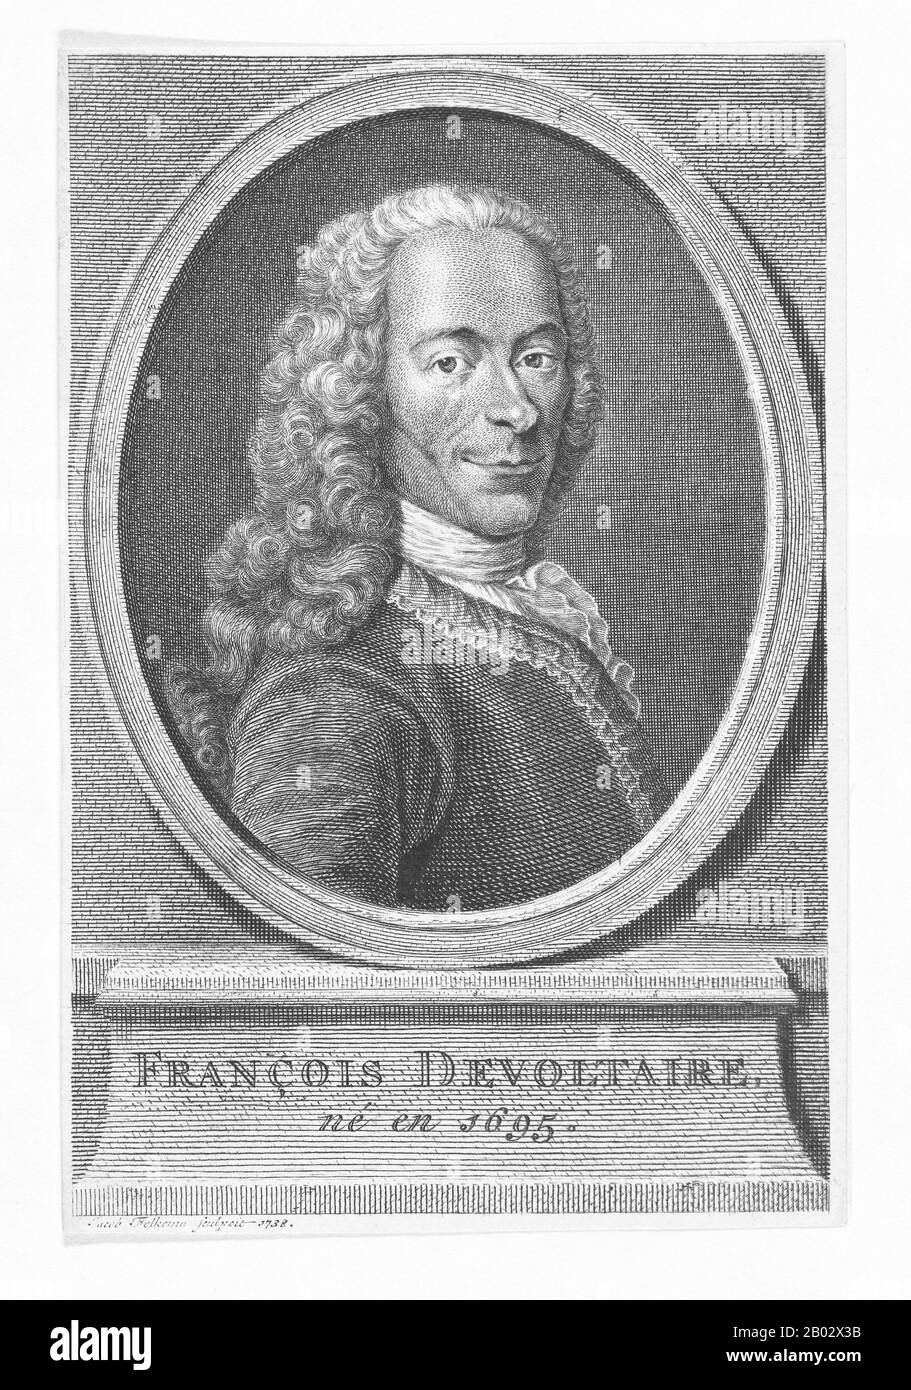 François-Marie Arouet (21 November 1694 – 30 May 1778), known by his nom de plume Voltaire, was a French Enlightenment writer, historian, and philosopher famous for his wit, his attacks on the established Catholic Church, and his advocacy of freedom of religion, freedom of expression, and separation of church and state.  Voltaire was a versatile writer, producing works in almost every literary form, including plays, poems, novels, essays, and historical and scientific works. He wrote more than 20,000 letters and more than 2,000 books and pamphlets. He was an outspoken advocate, despite the ris Stock Photo